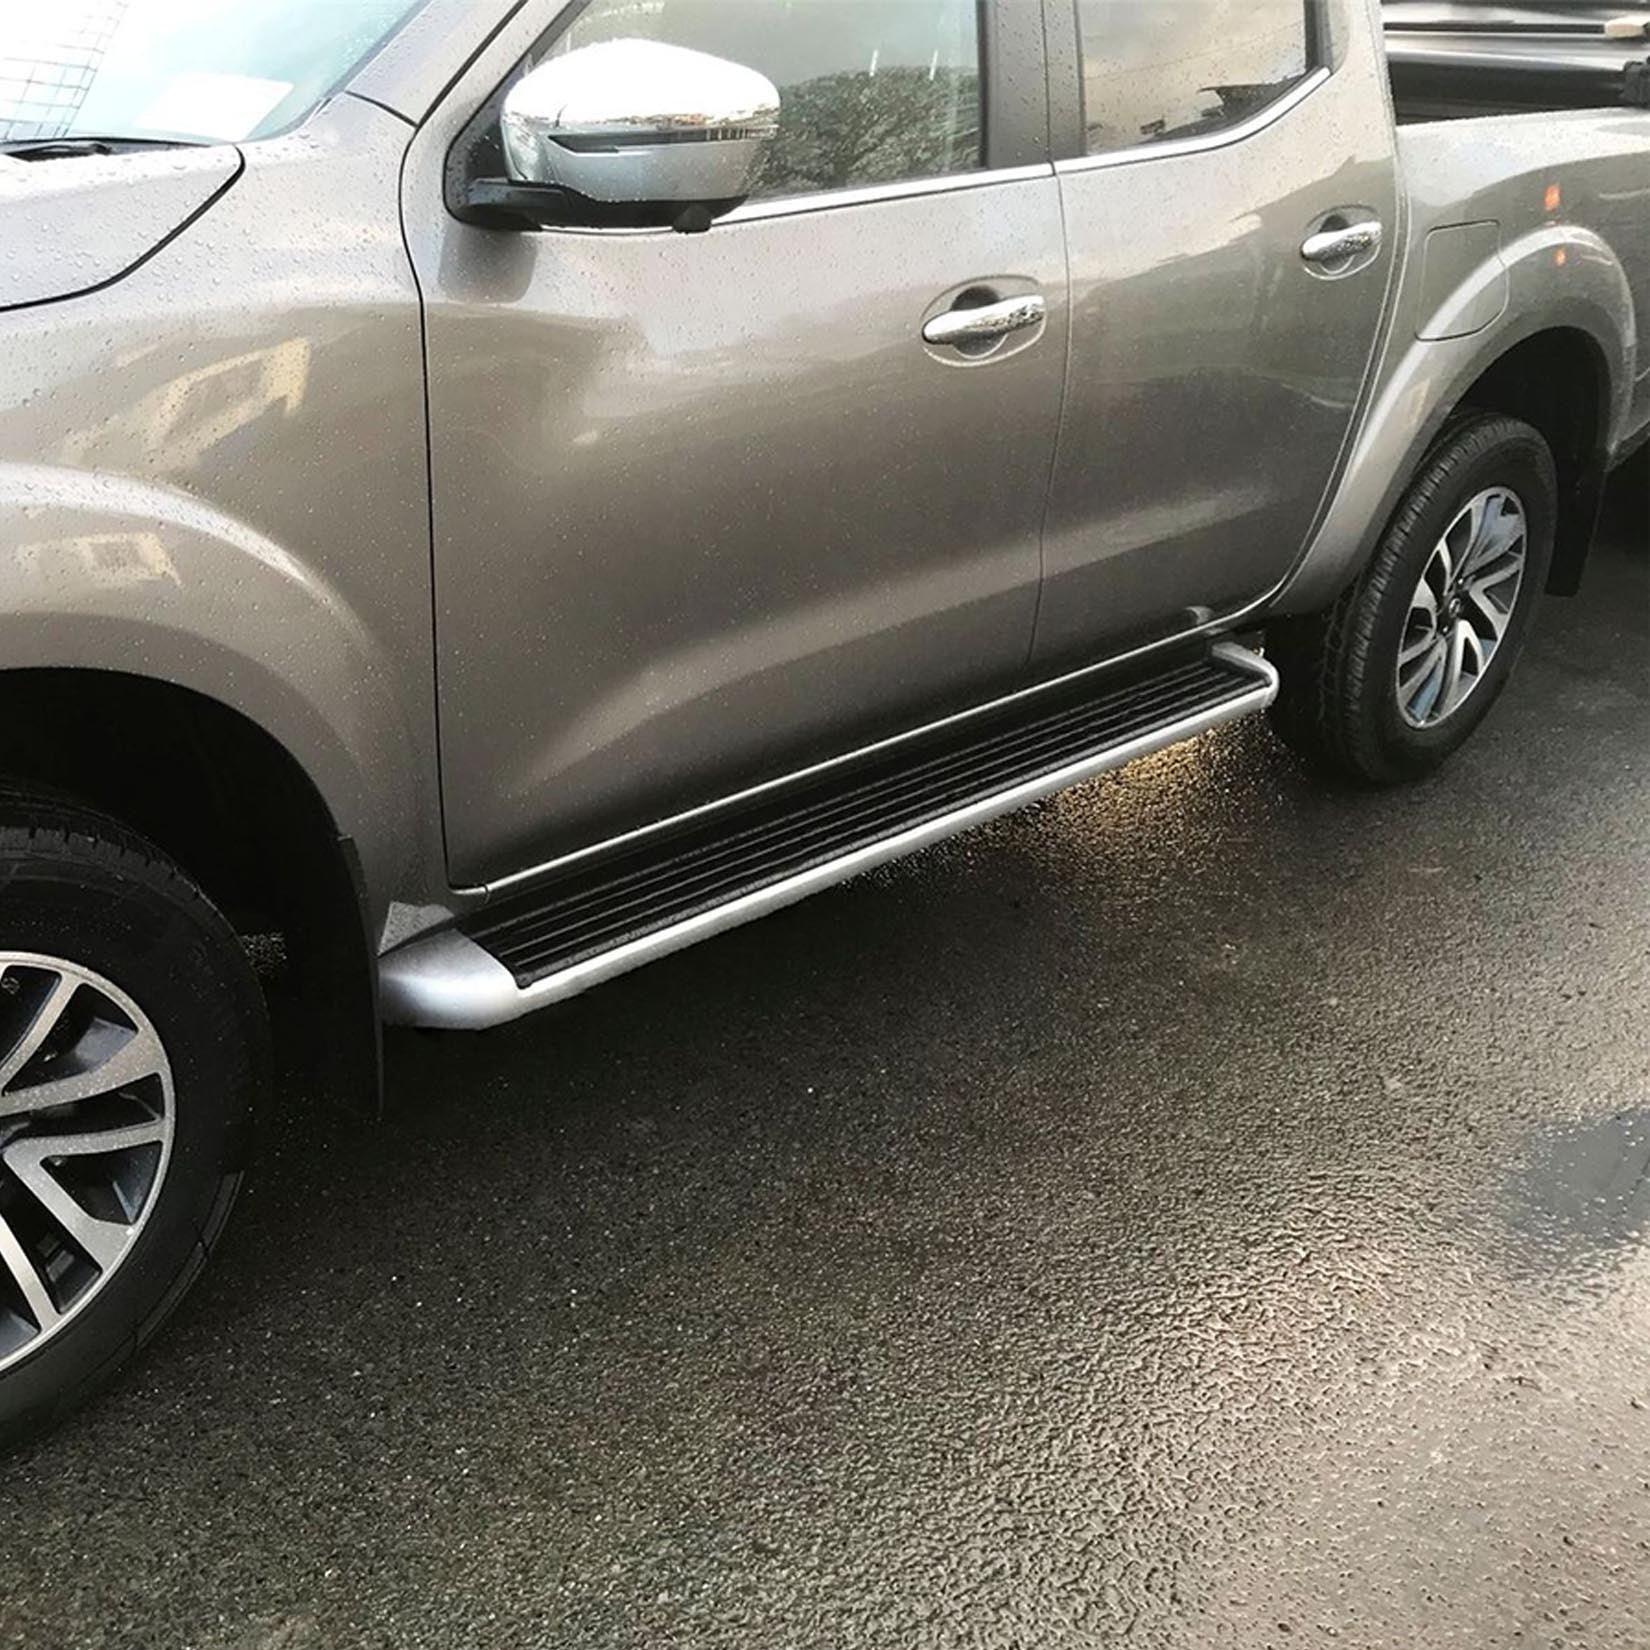 NISSAN NAVARA NP300 2016 ON - DOUBLE CAB RUNNING BOARDS SIDE STEPS - OE STYLE - PAIR - Storm Xccessories2